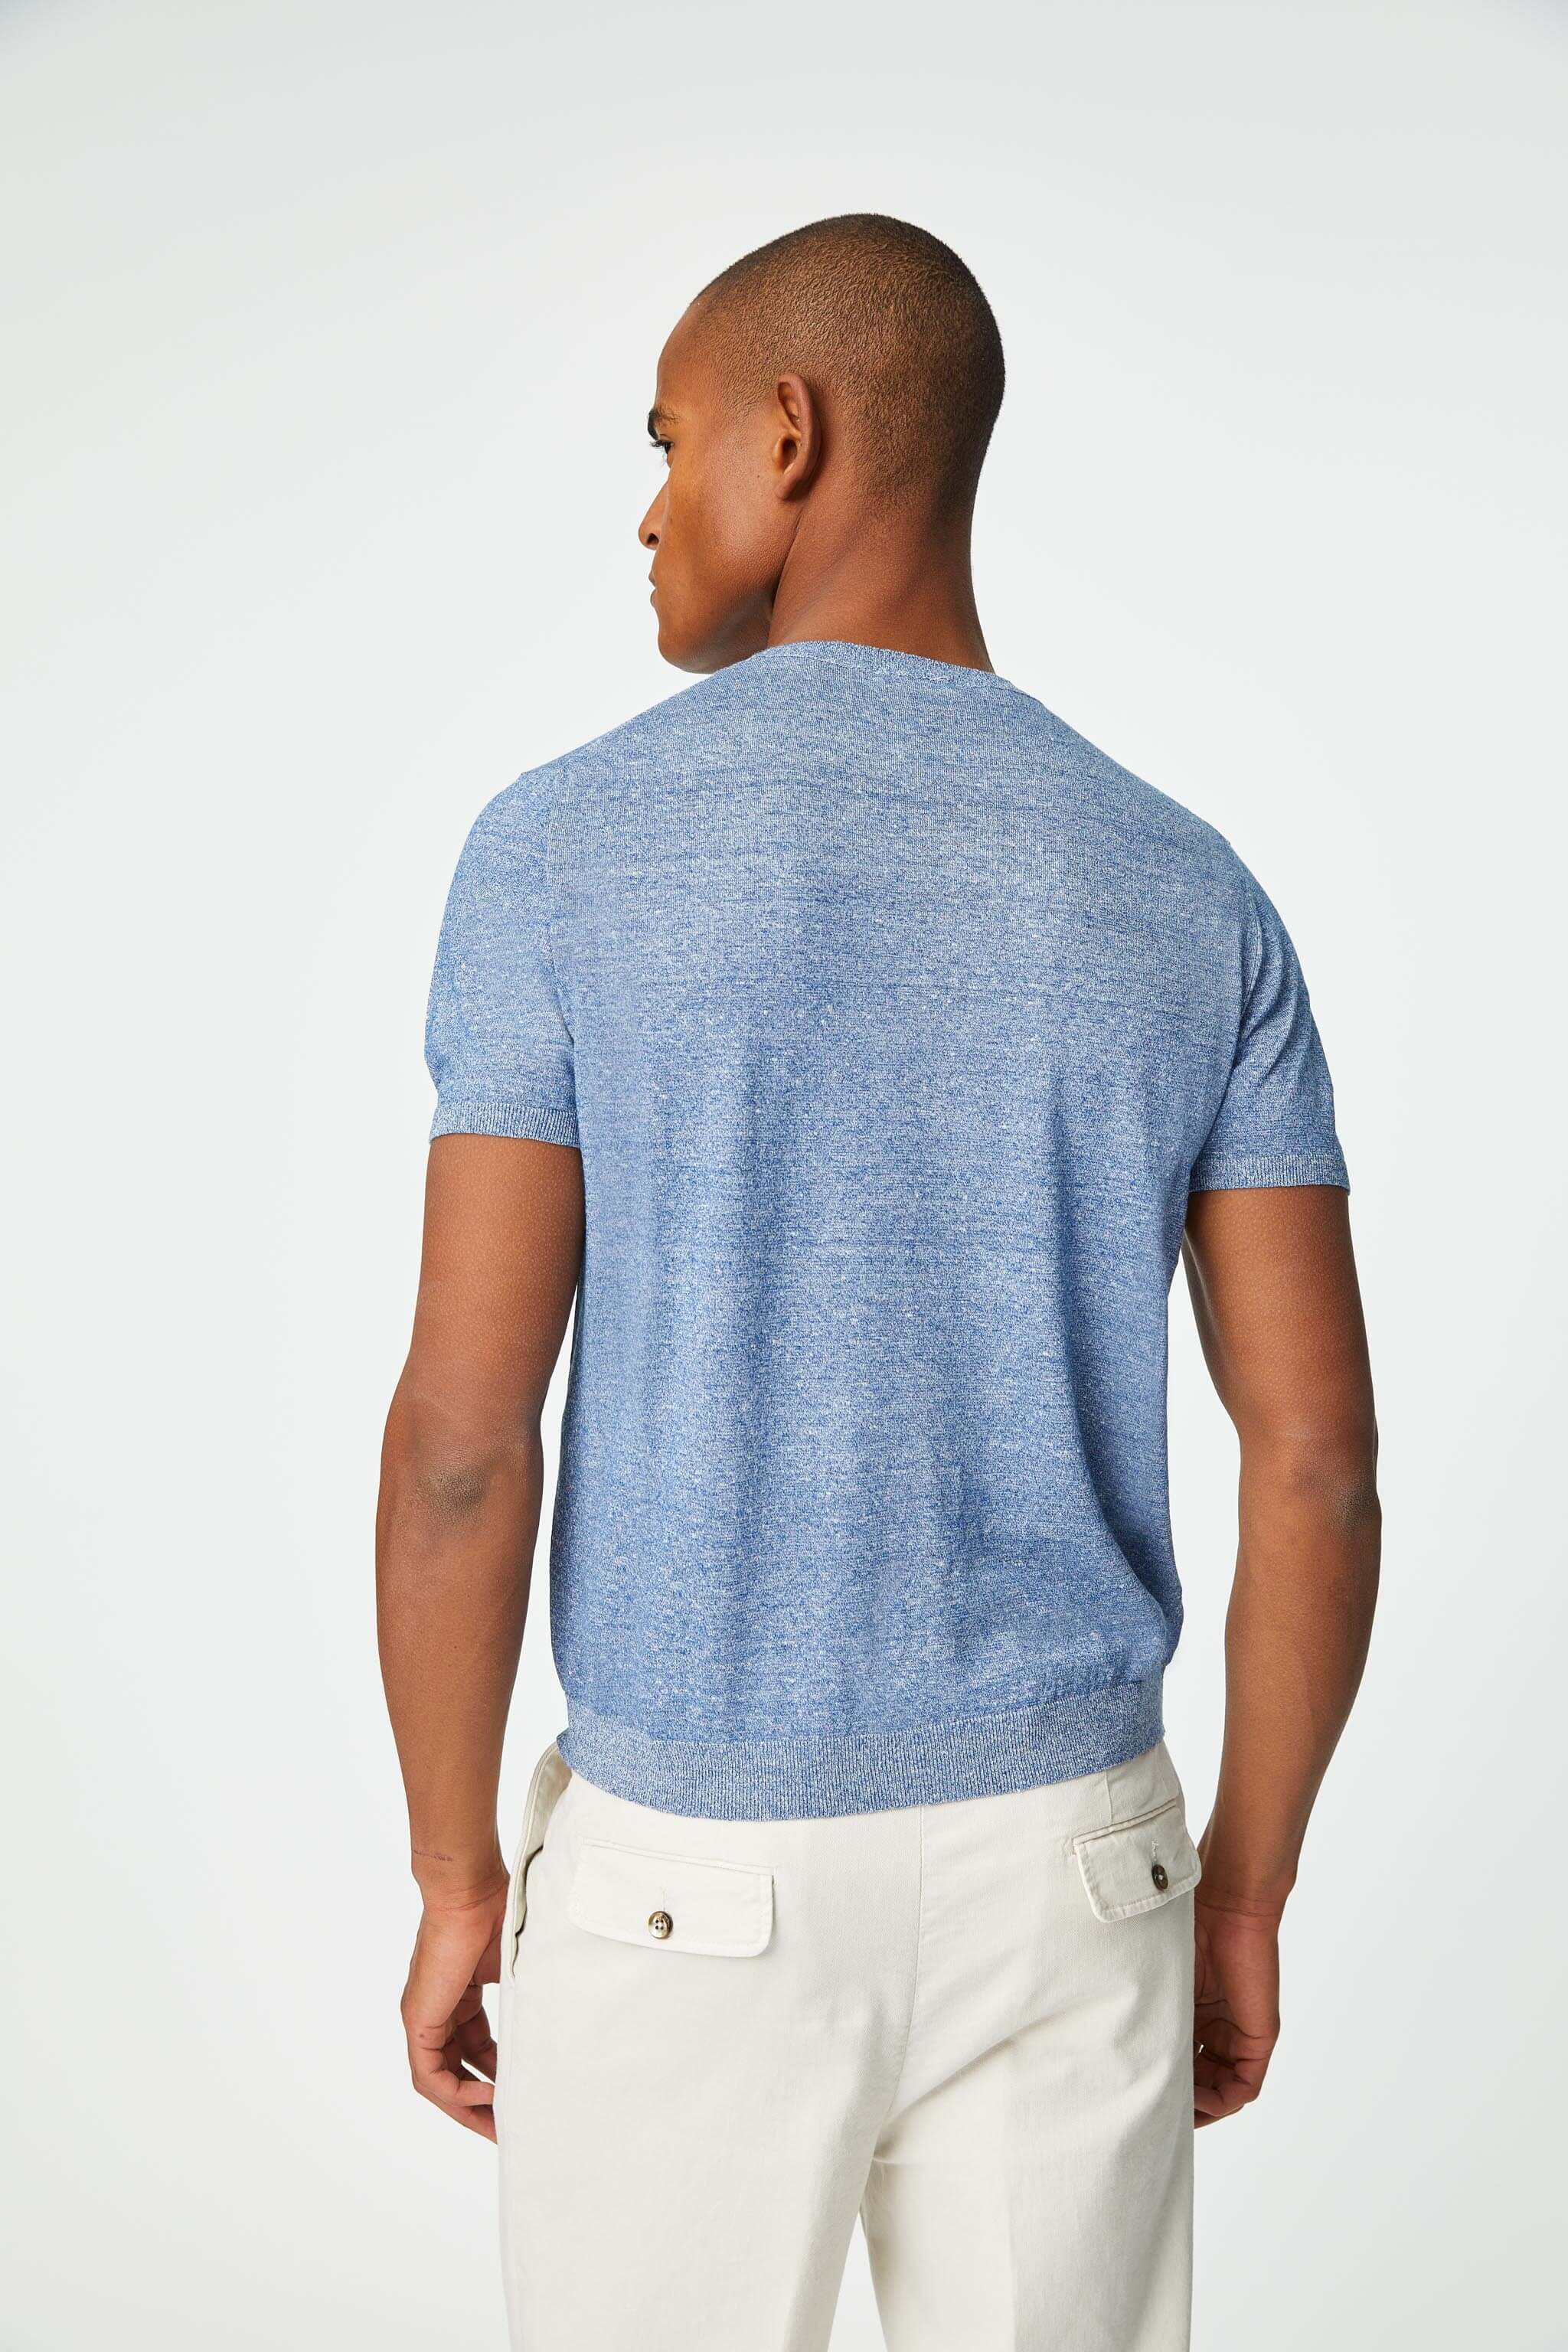 Sky blue T-shirt in a linen and cotton blend